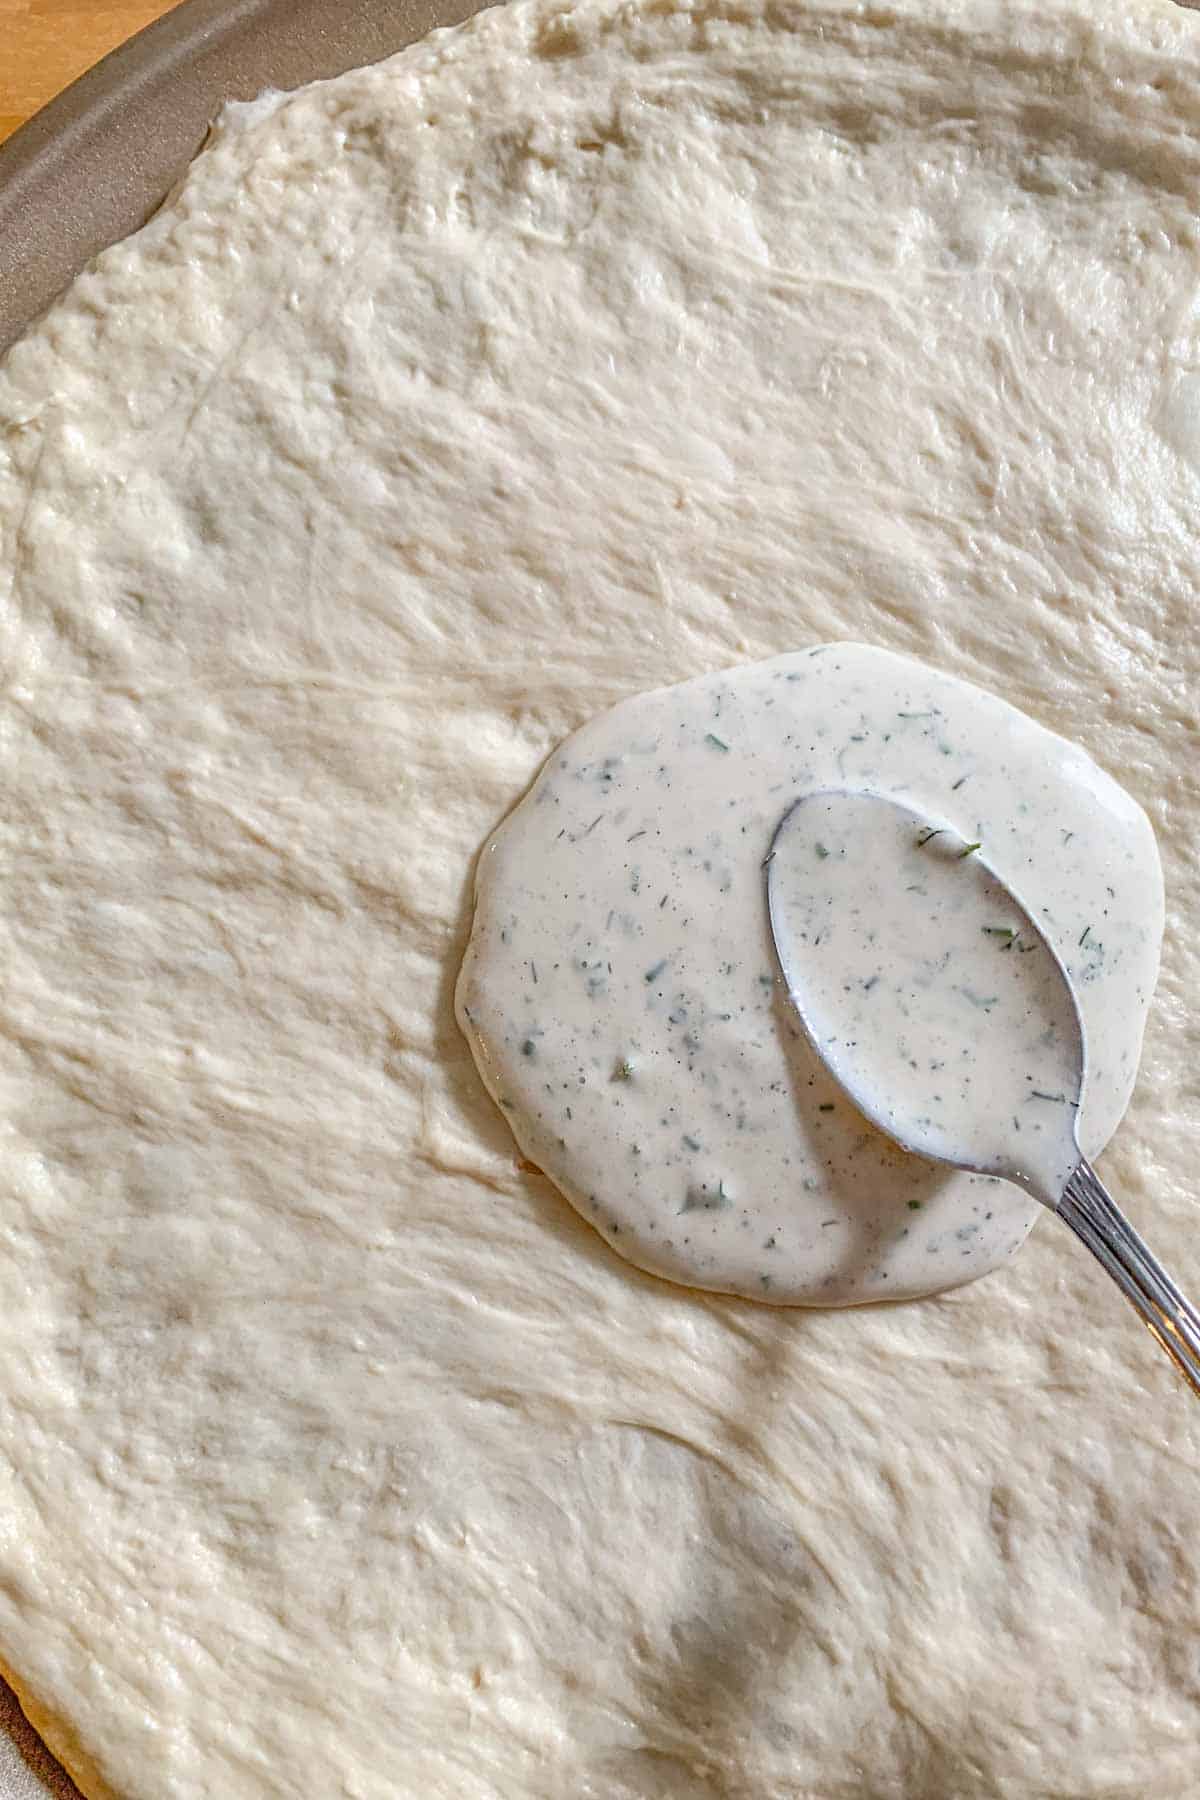 Unbaked pizza crust with ranch dressing being spread on with a spoon.